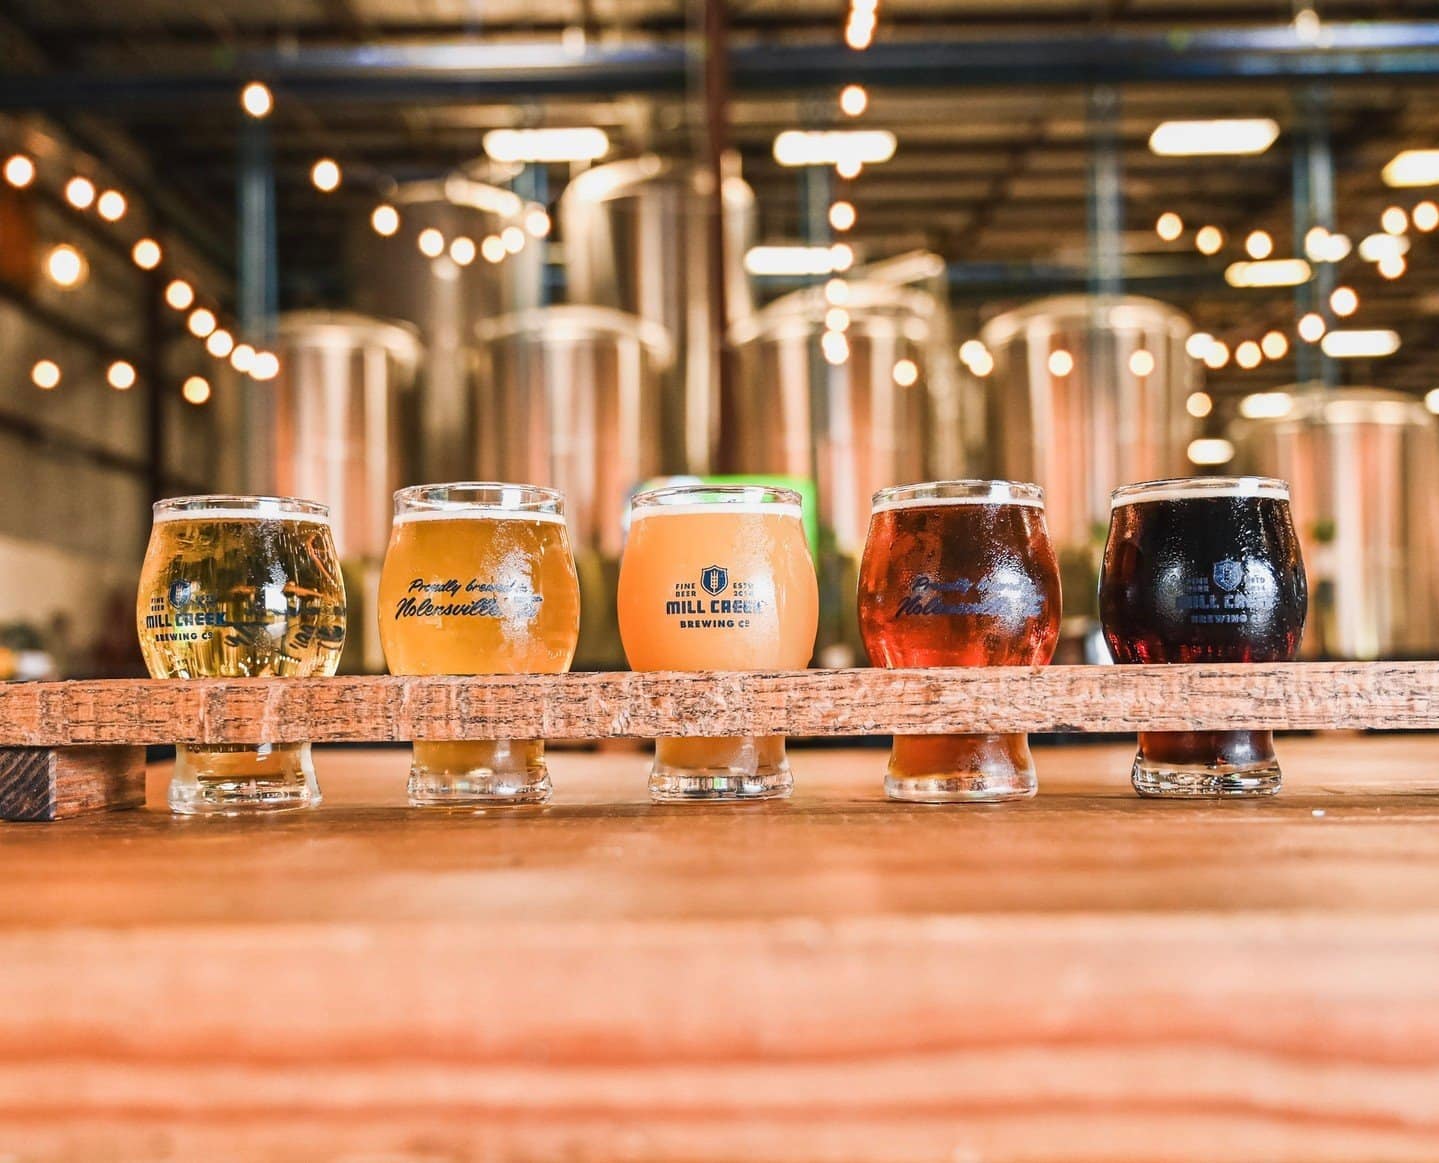 Mill Creek Brewing Company is a craft brewery along the Masters &amp; Makers Trail that runs through Williamson County, Tennessee. Photo Courtesy VisitFranklin.com